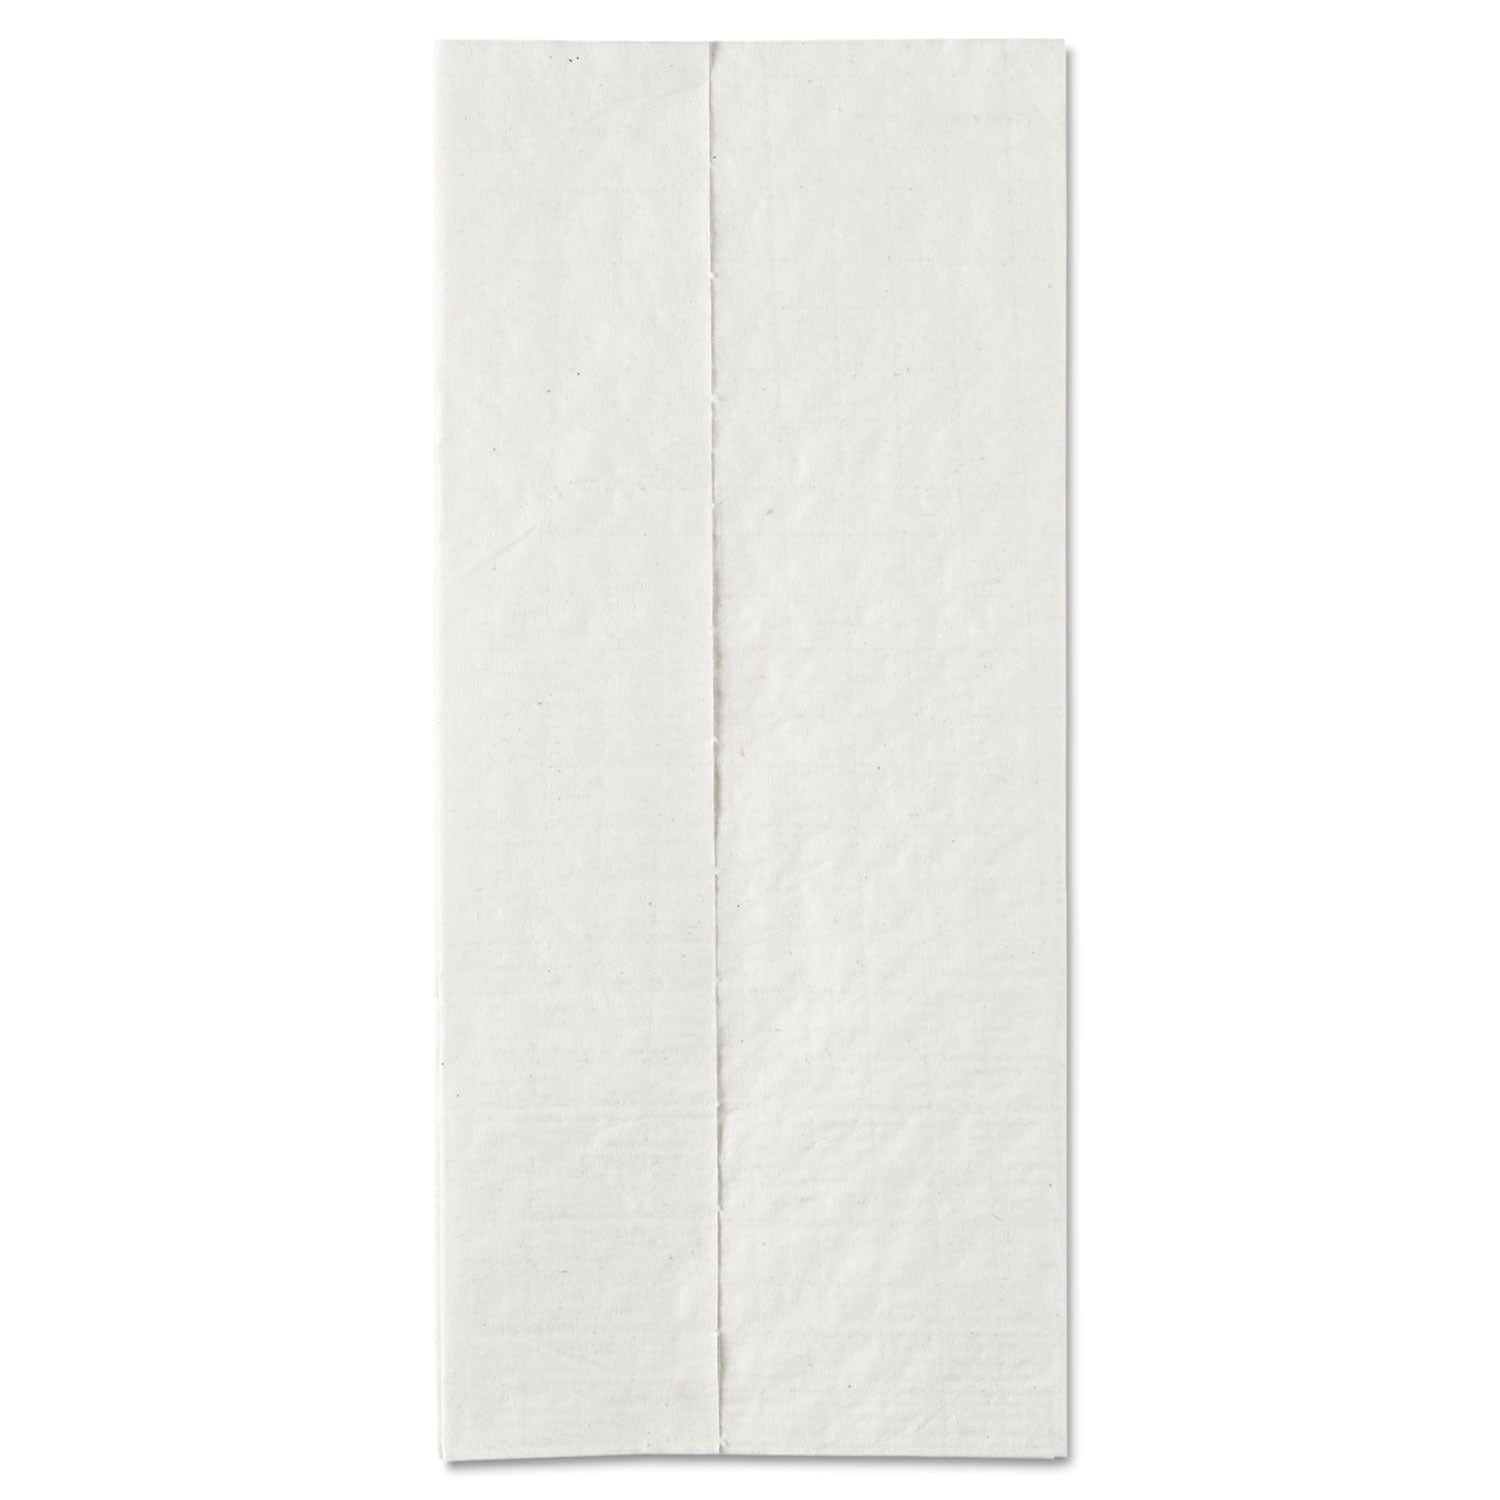 medium-duty-scrim-reinforced-wipers-4-ply-925-x-1669-unscented-white-166-box-5-boxes-carton_gpc2905003 - 3